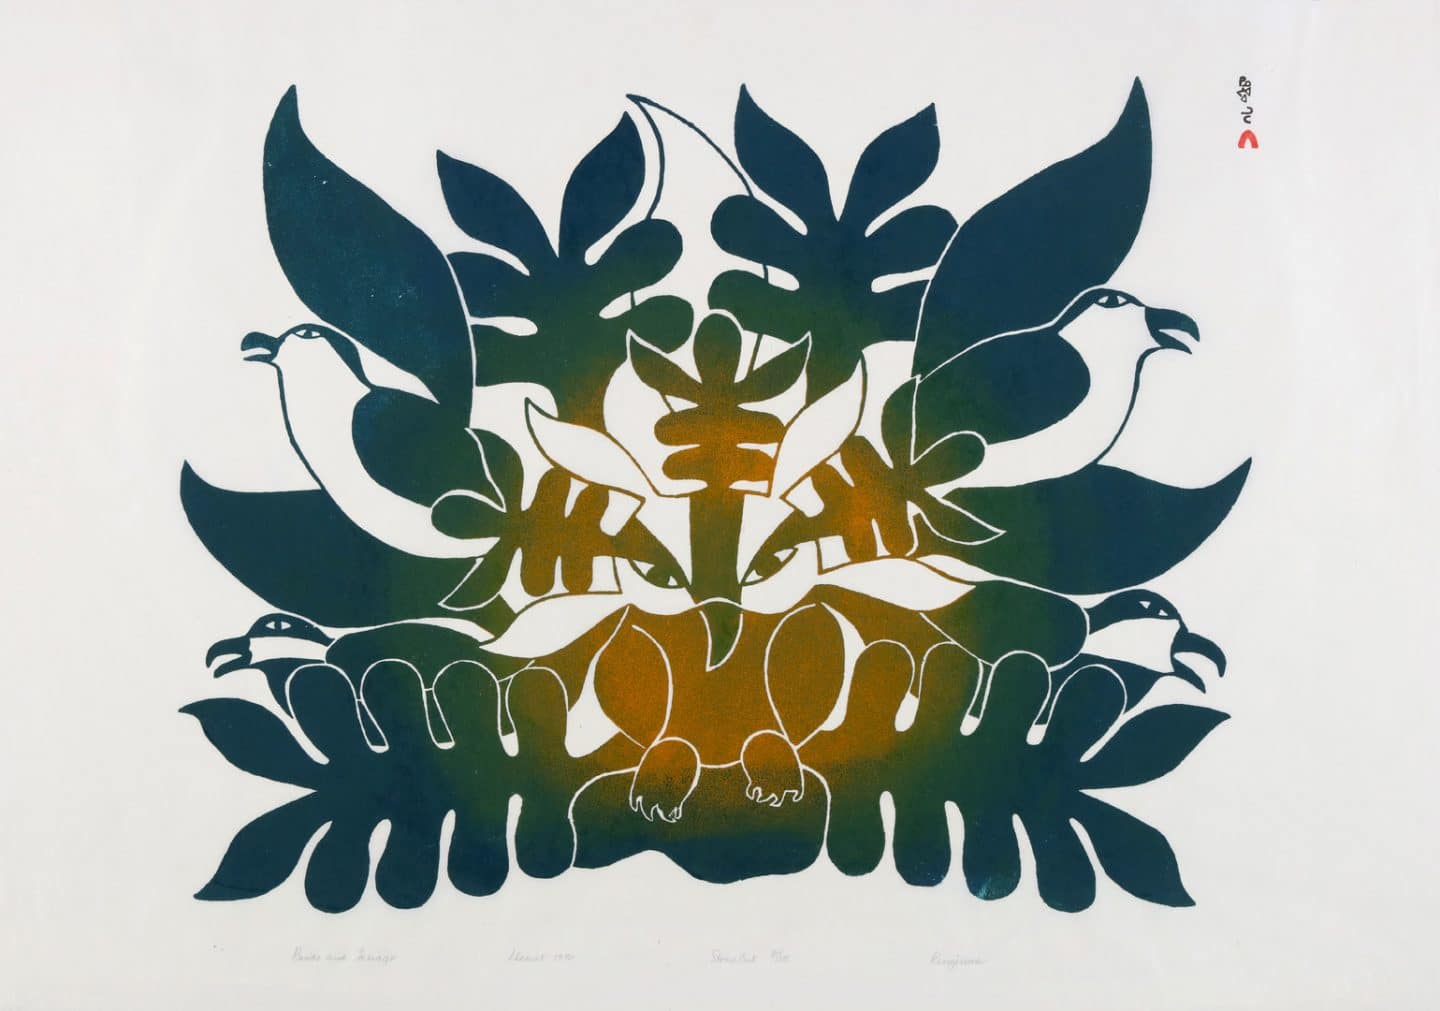 Kenojuak Ashevak, Birds and Foliage, 1970, stonecut on paper, printed by Lukta Qiatsuk, on view in Face of the Sky. Gift of Mary Robertson, 1985 (28-123).